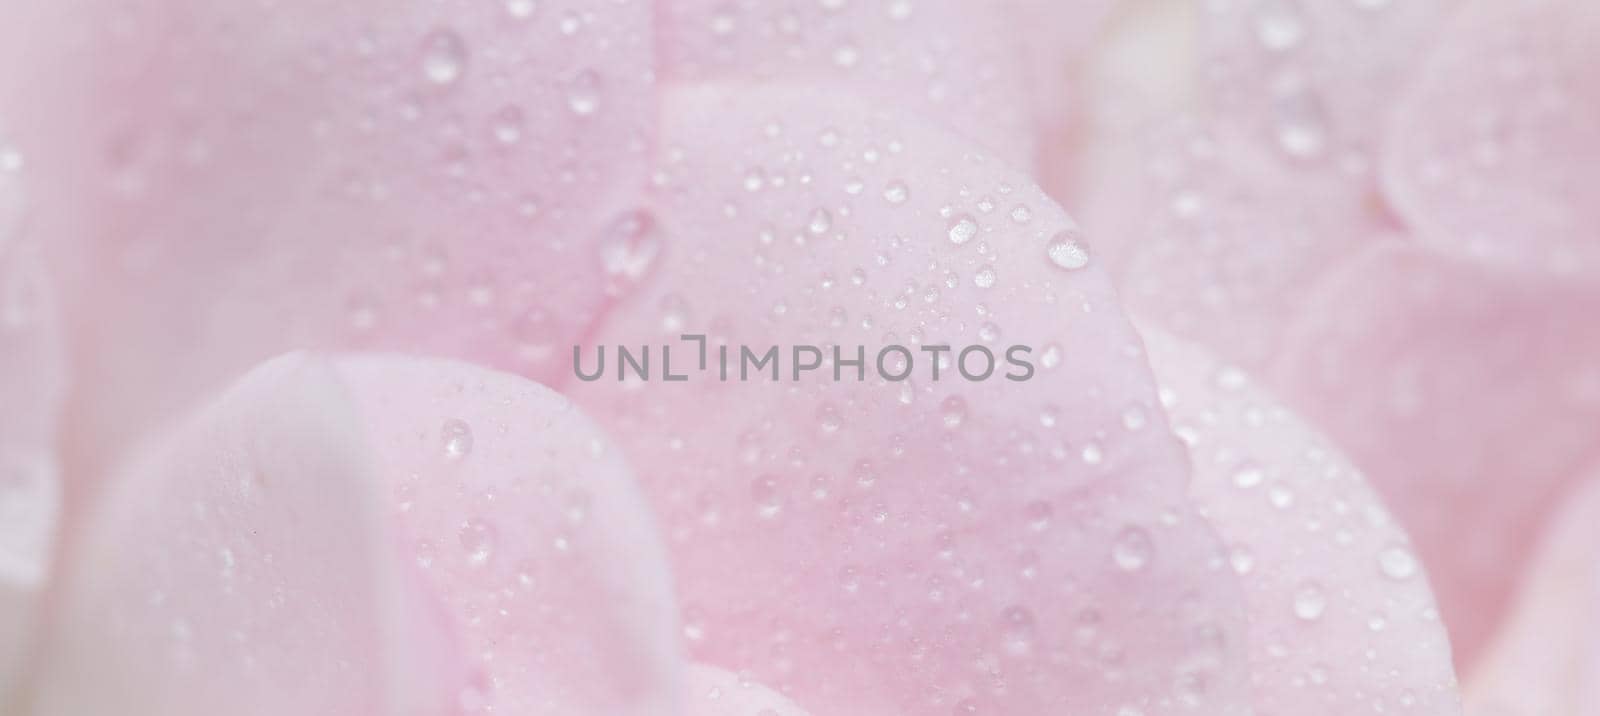 Botanical concept, wedding invitation card - Soft focus, abstract floral background, pink rose flower petals with water drops. Macro flowers backdrop for holiday brand design